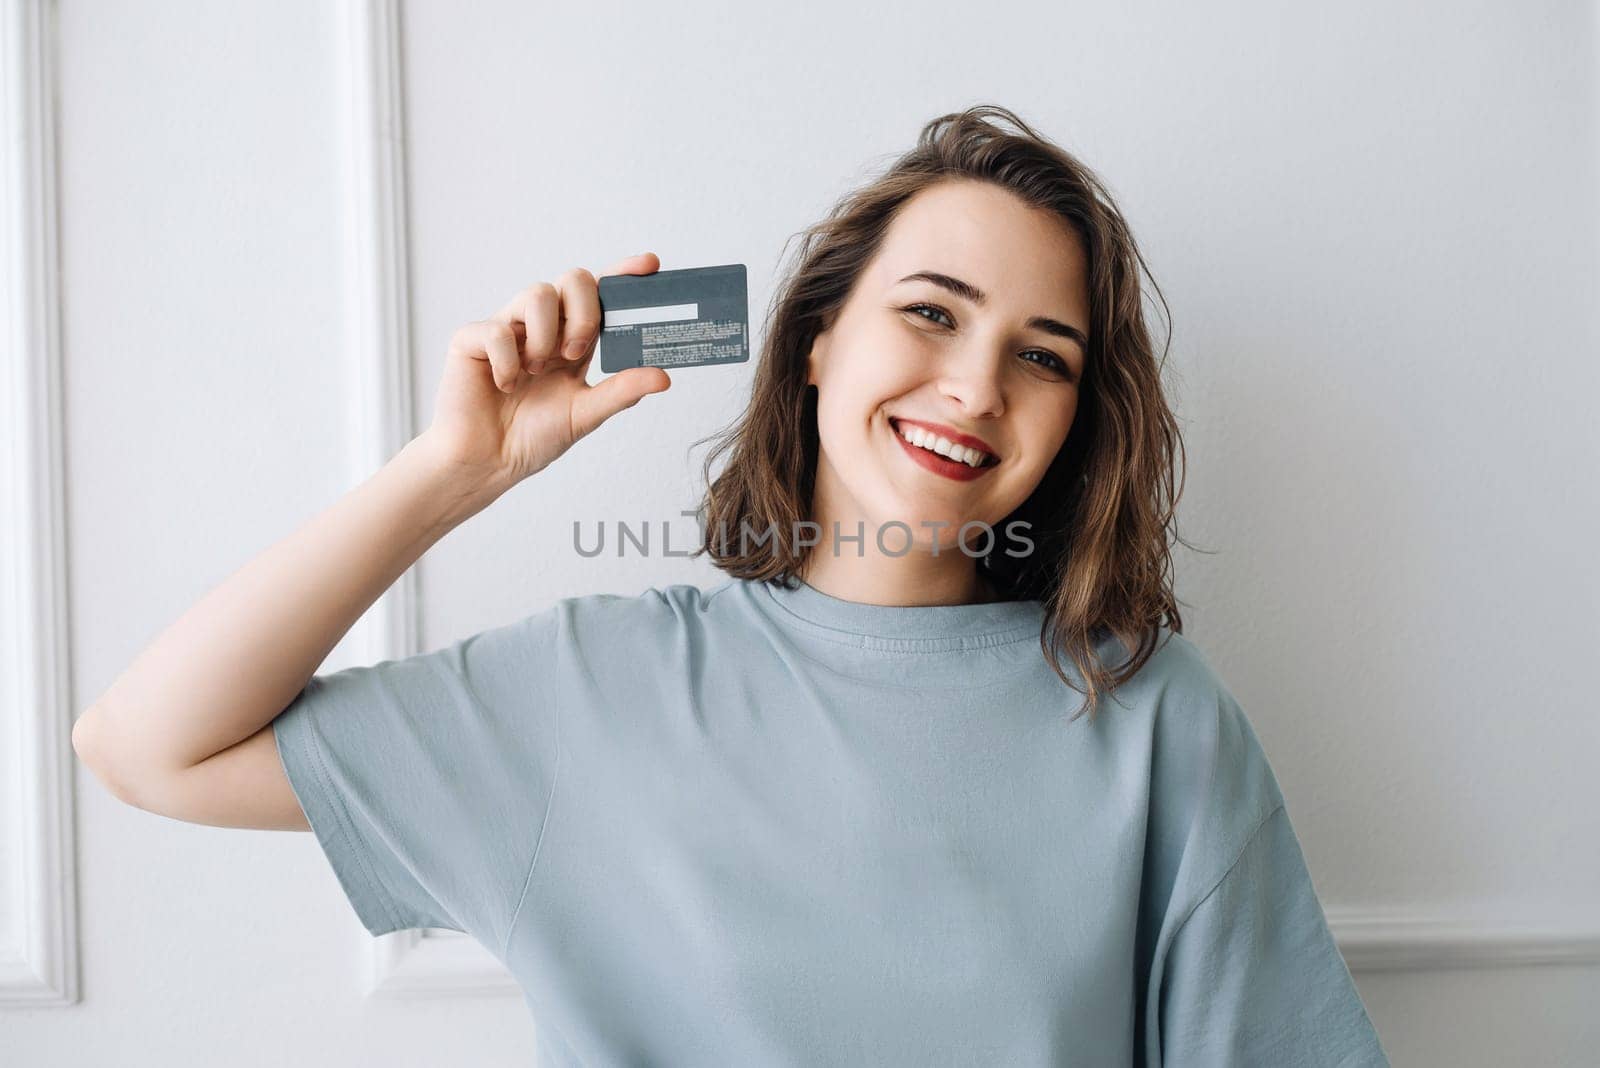 Smiling Middle-Aged Woman Displaying Credit Card in Studio Close-up. Cheerful Mature Woman Showing Credit Card in Studio, Close-up Shot. Joyful Middle-Aged Lady Displaying Credit Card with Smile.